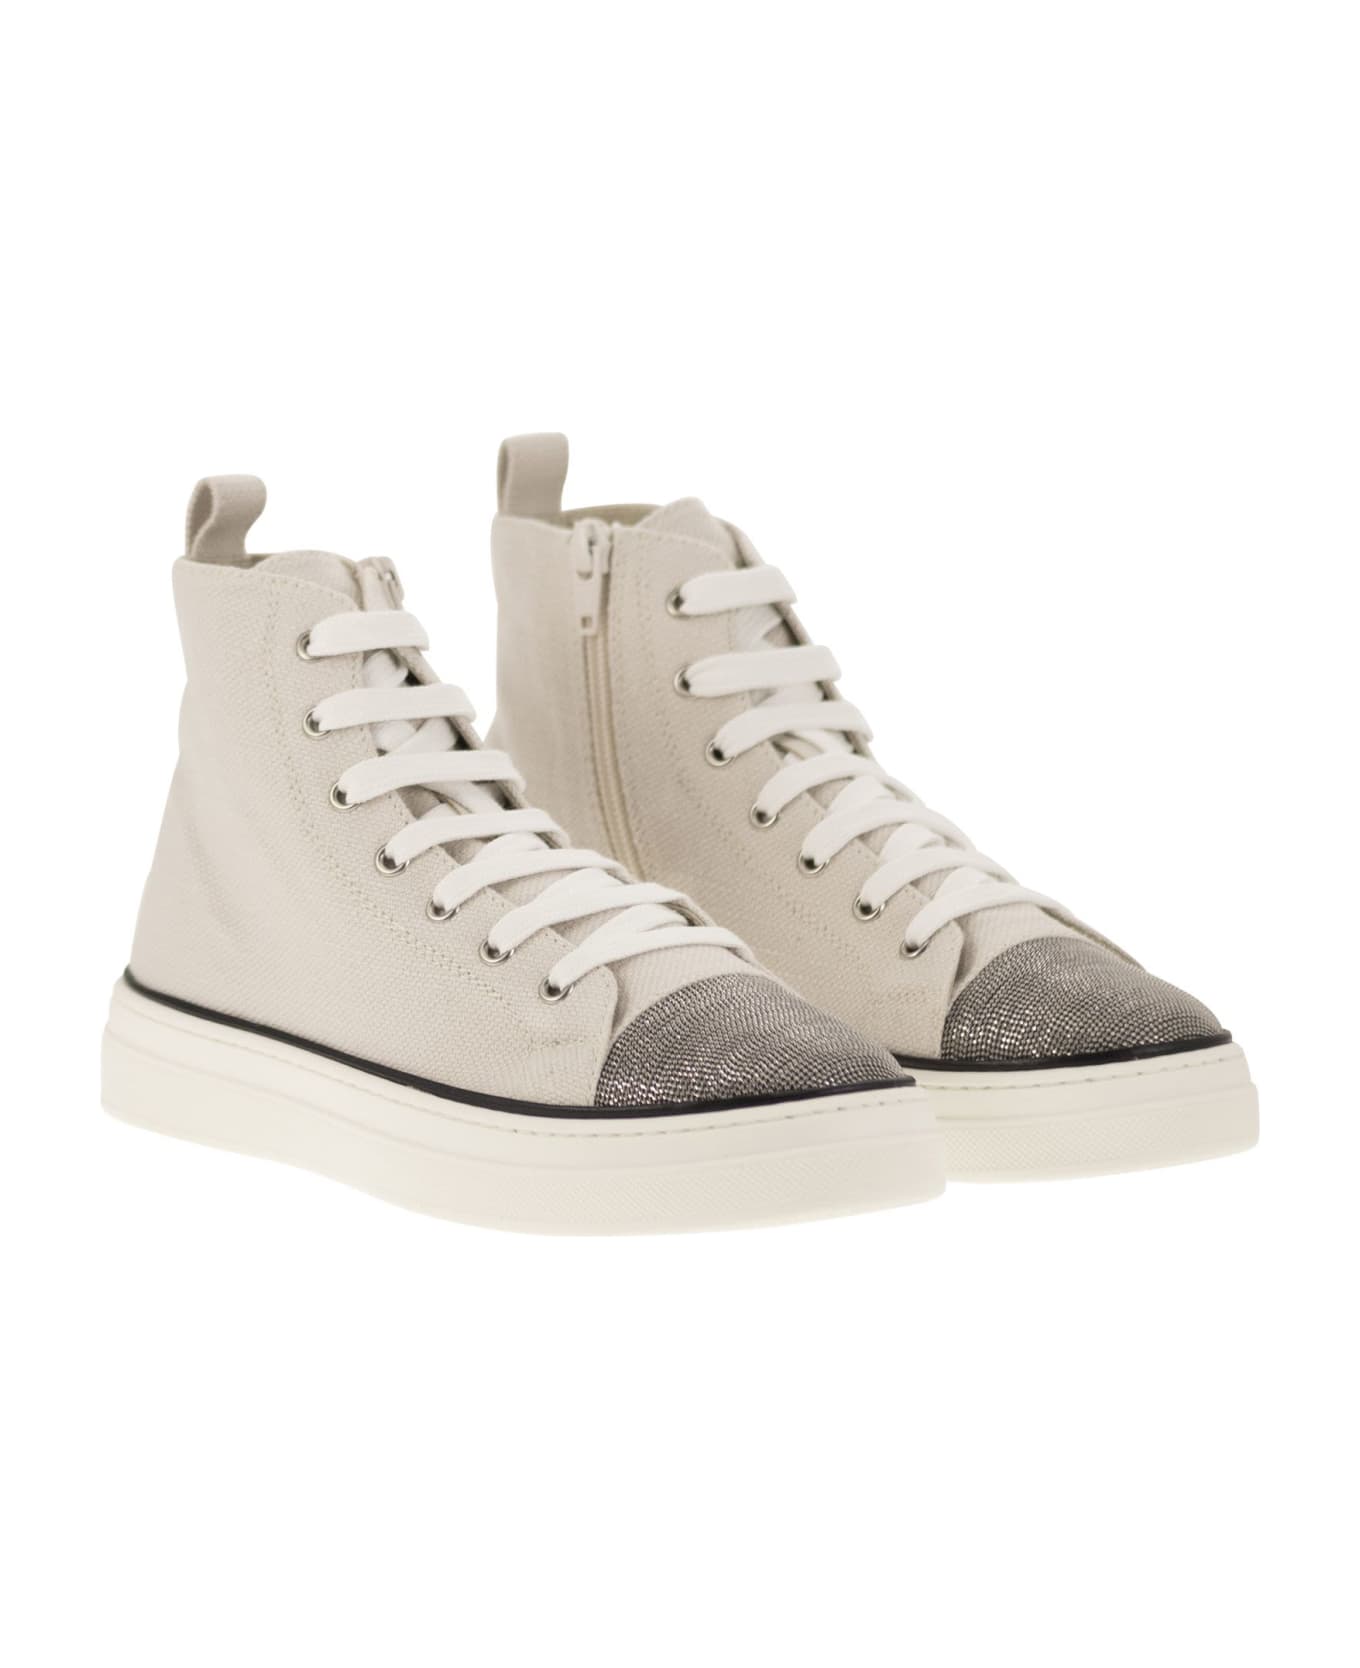 Brunello Cucinelli High-top Sneakers In Cotton And Linen - White シューズ